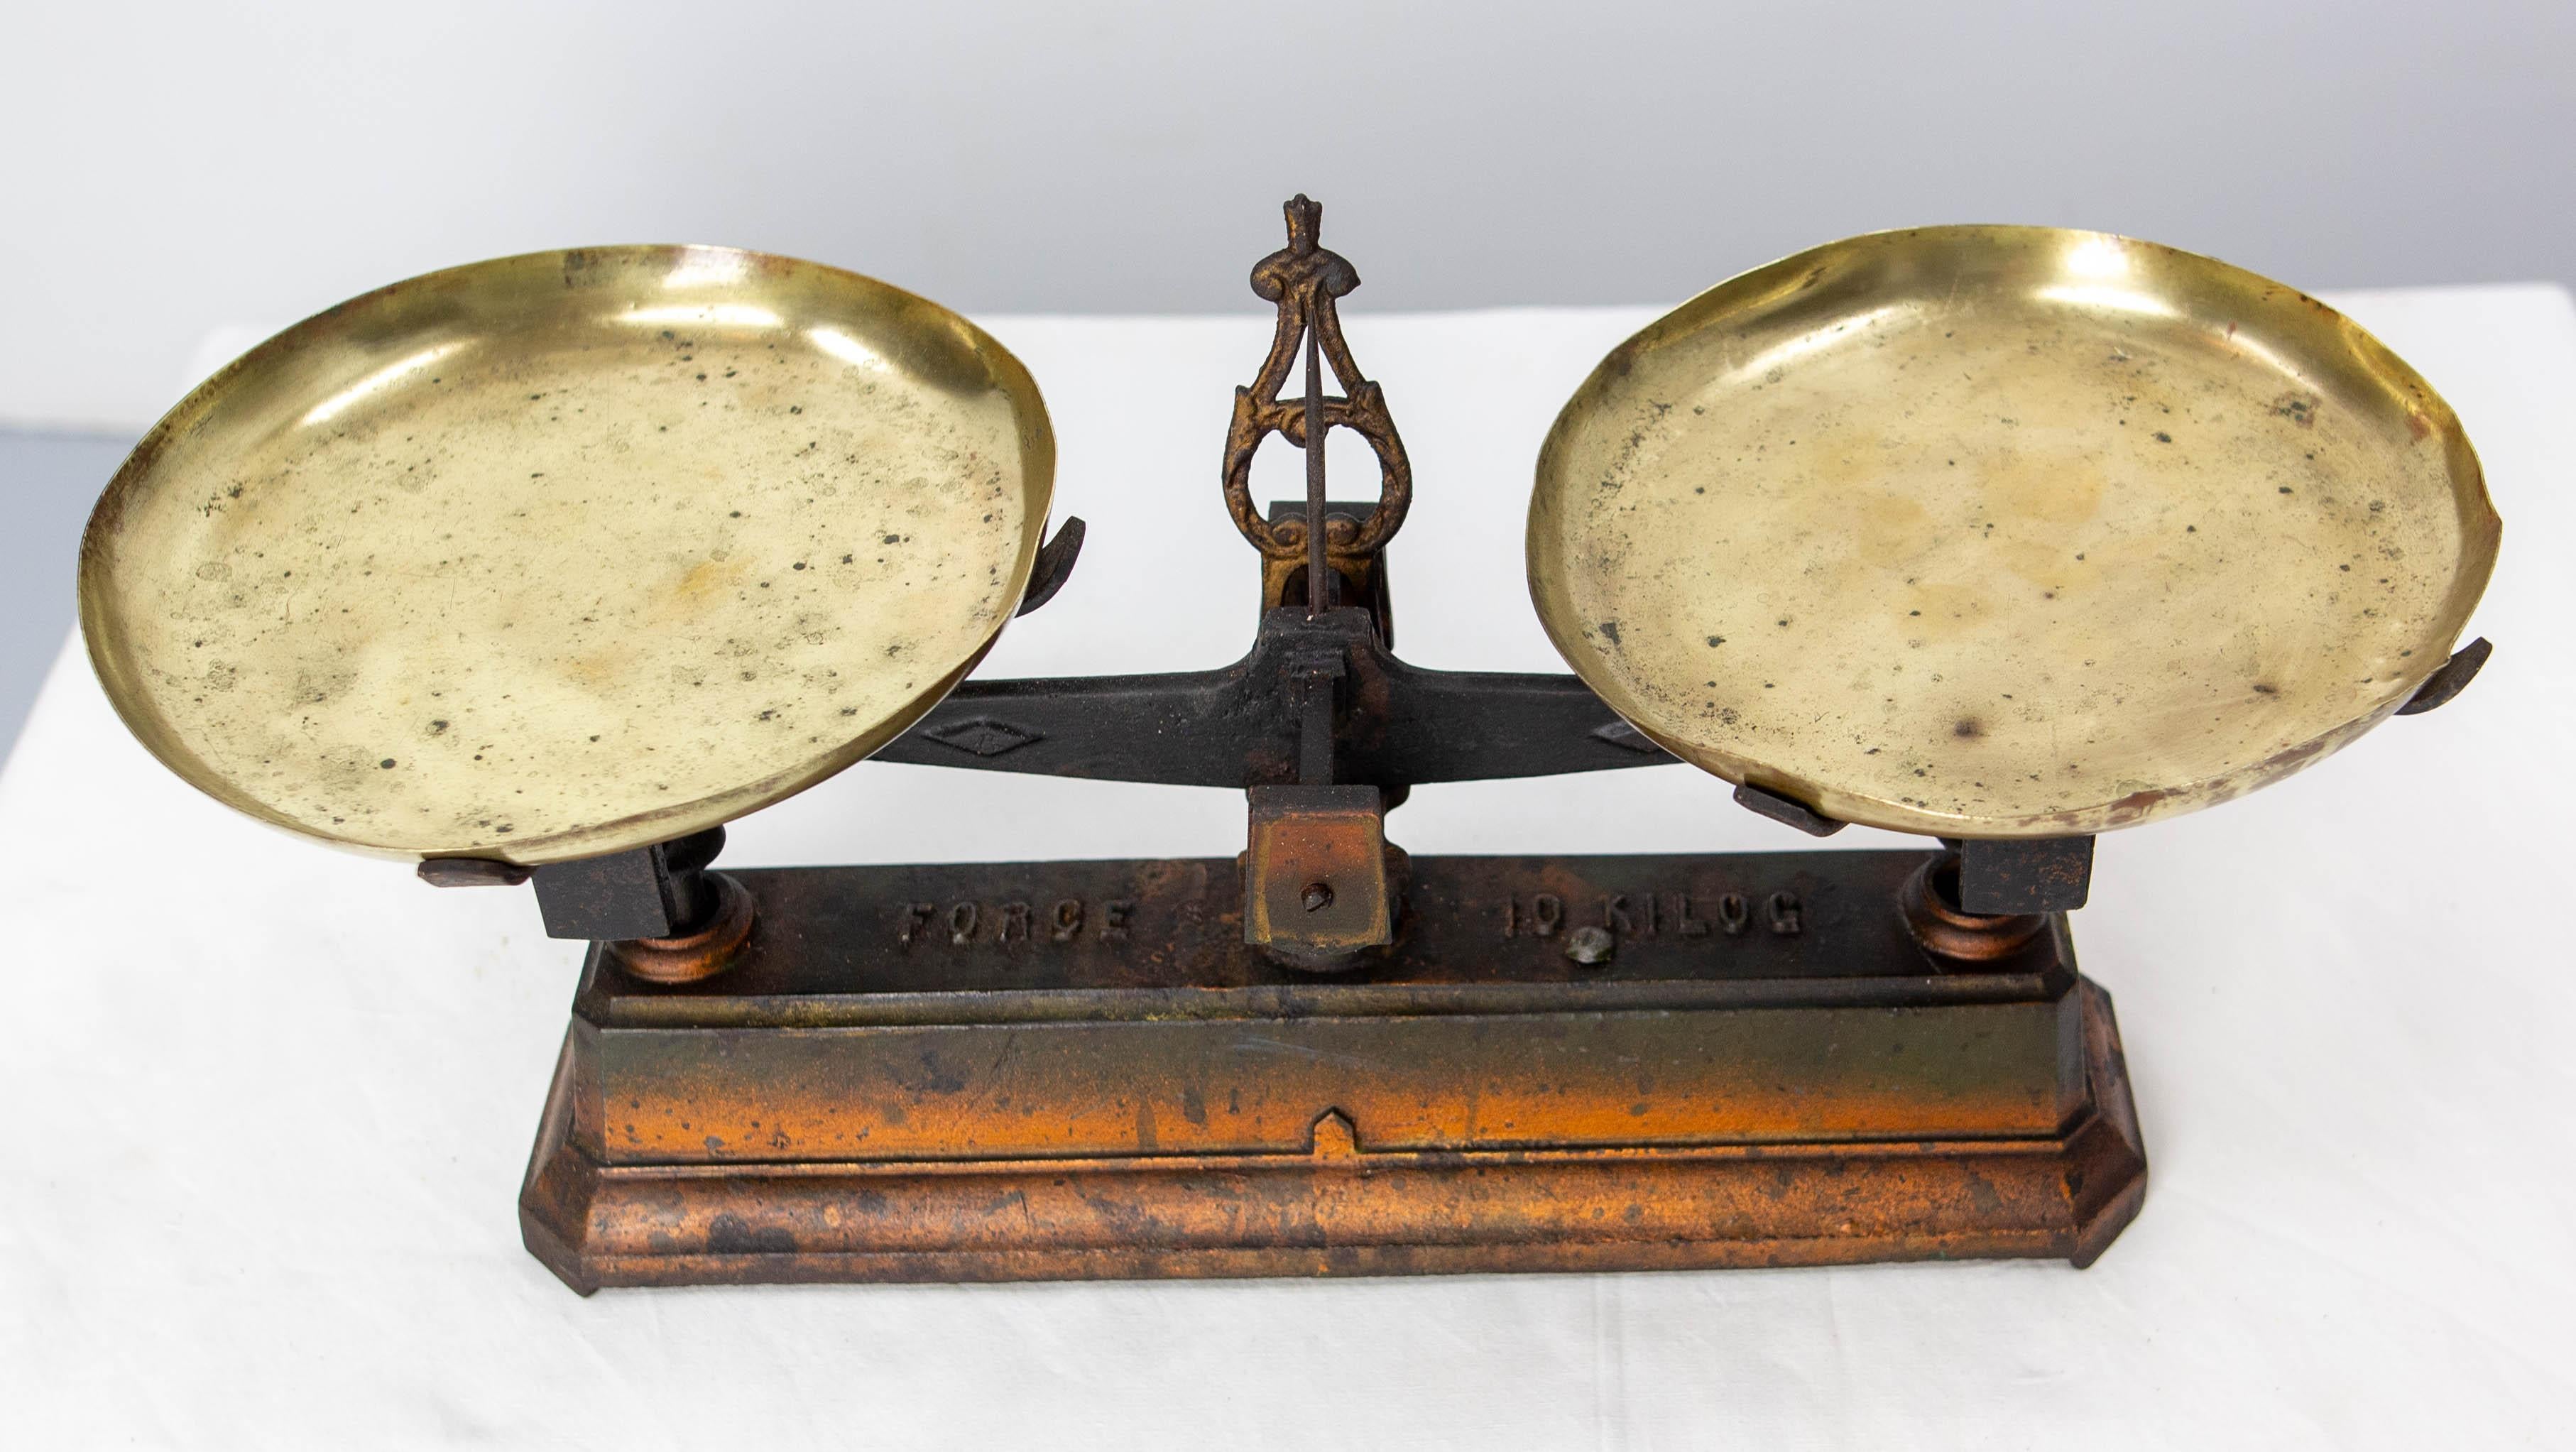 This trade scale was made in the late 19th century in France. It was a scale used by traders for retail.
Brass and painted cast-iron
Patina and signs of use which make this antique object very characterful
Noticed in the cast iron : 